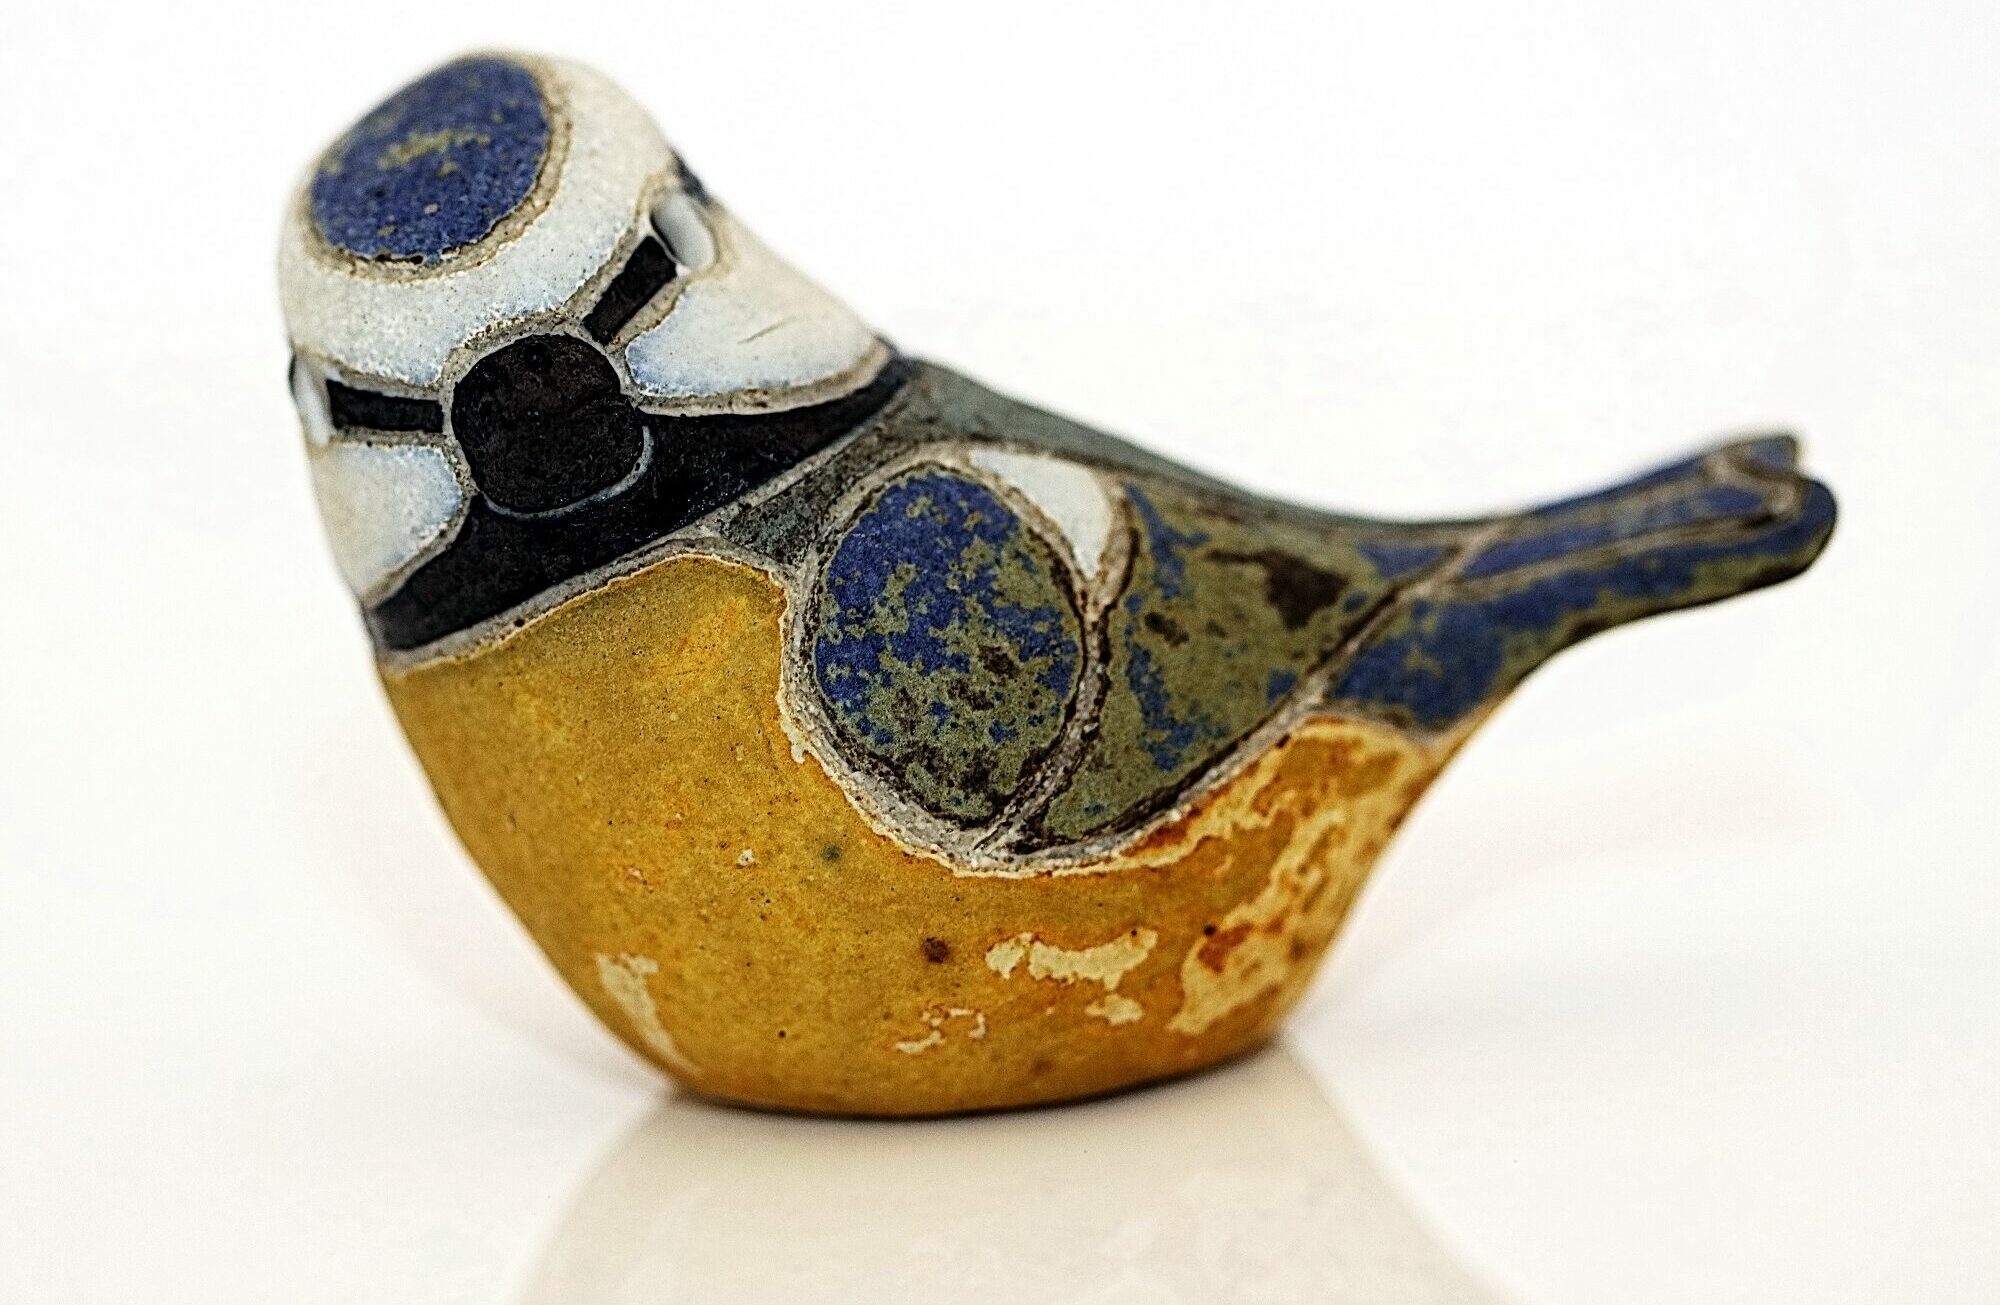 Pottery blue tit, approximately life-size, with a matt glaze, coloured blue and yellow. It is one of three pottery birds made in 1987 by Rosemary Wren and Peter Crotty from drawings from life.